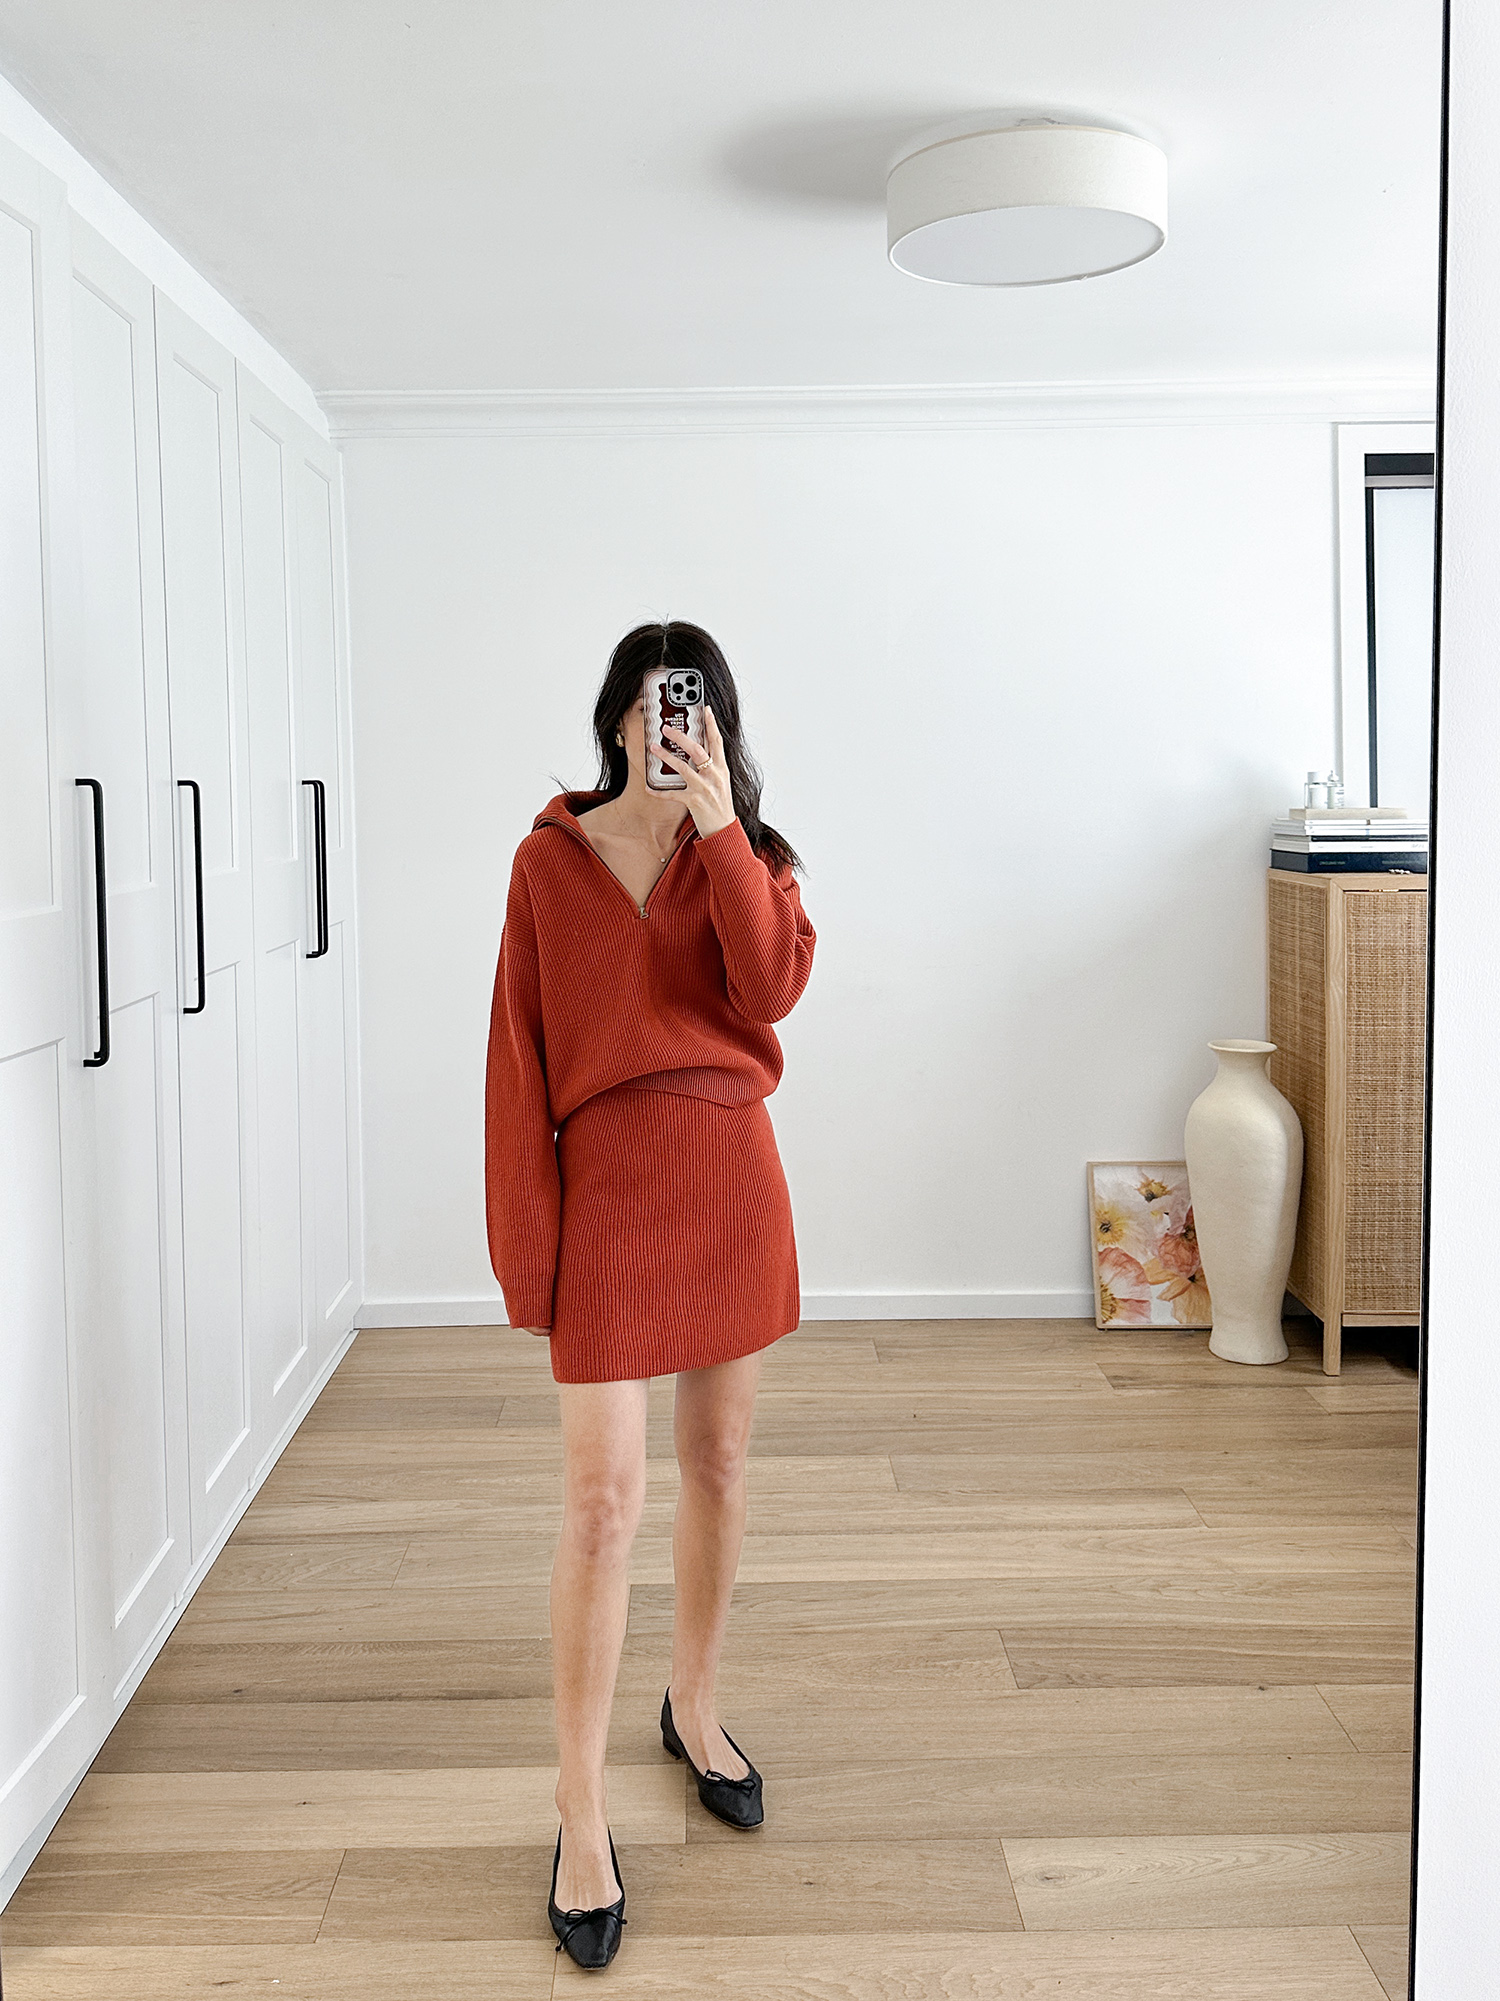 UNIQLO Clare Waight Keller collection half zip sweater review